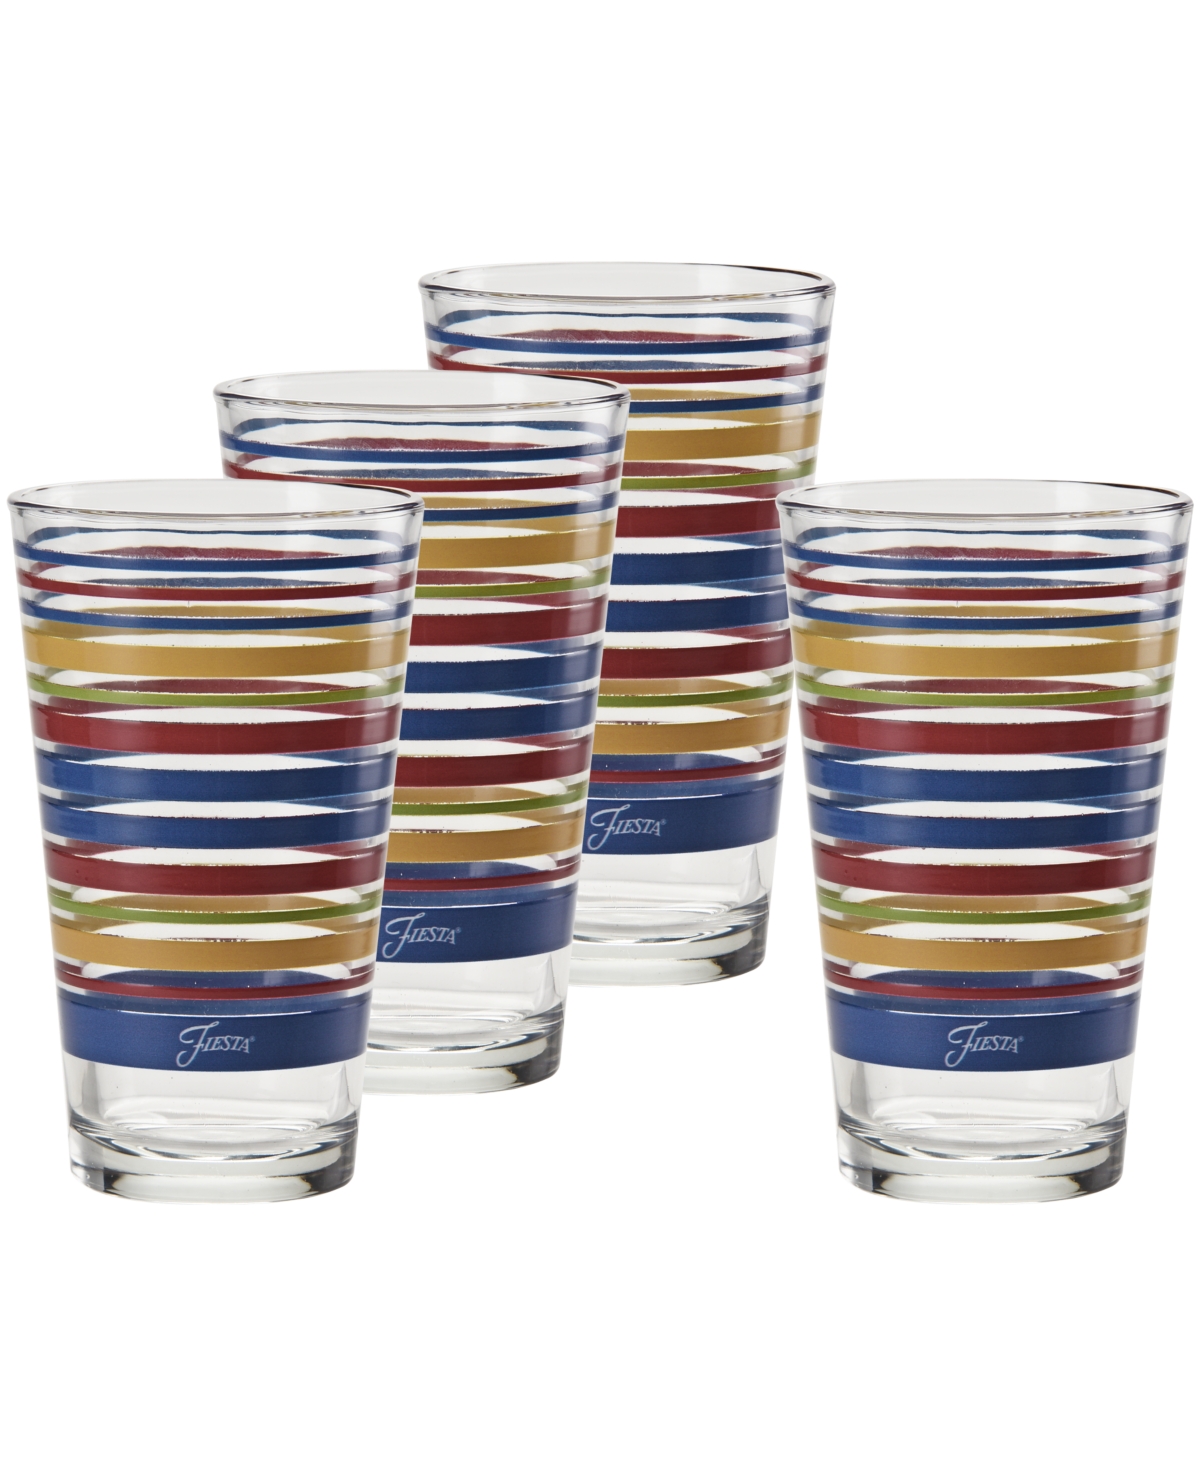 Fiesta Bright Stripes 16-ounce Tapered Cooler Glass, Set Of 4 In Lapis,scarlet,daffodil And Lemongrass